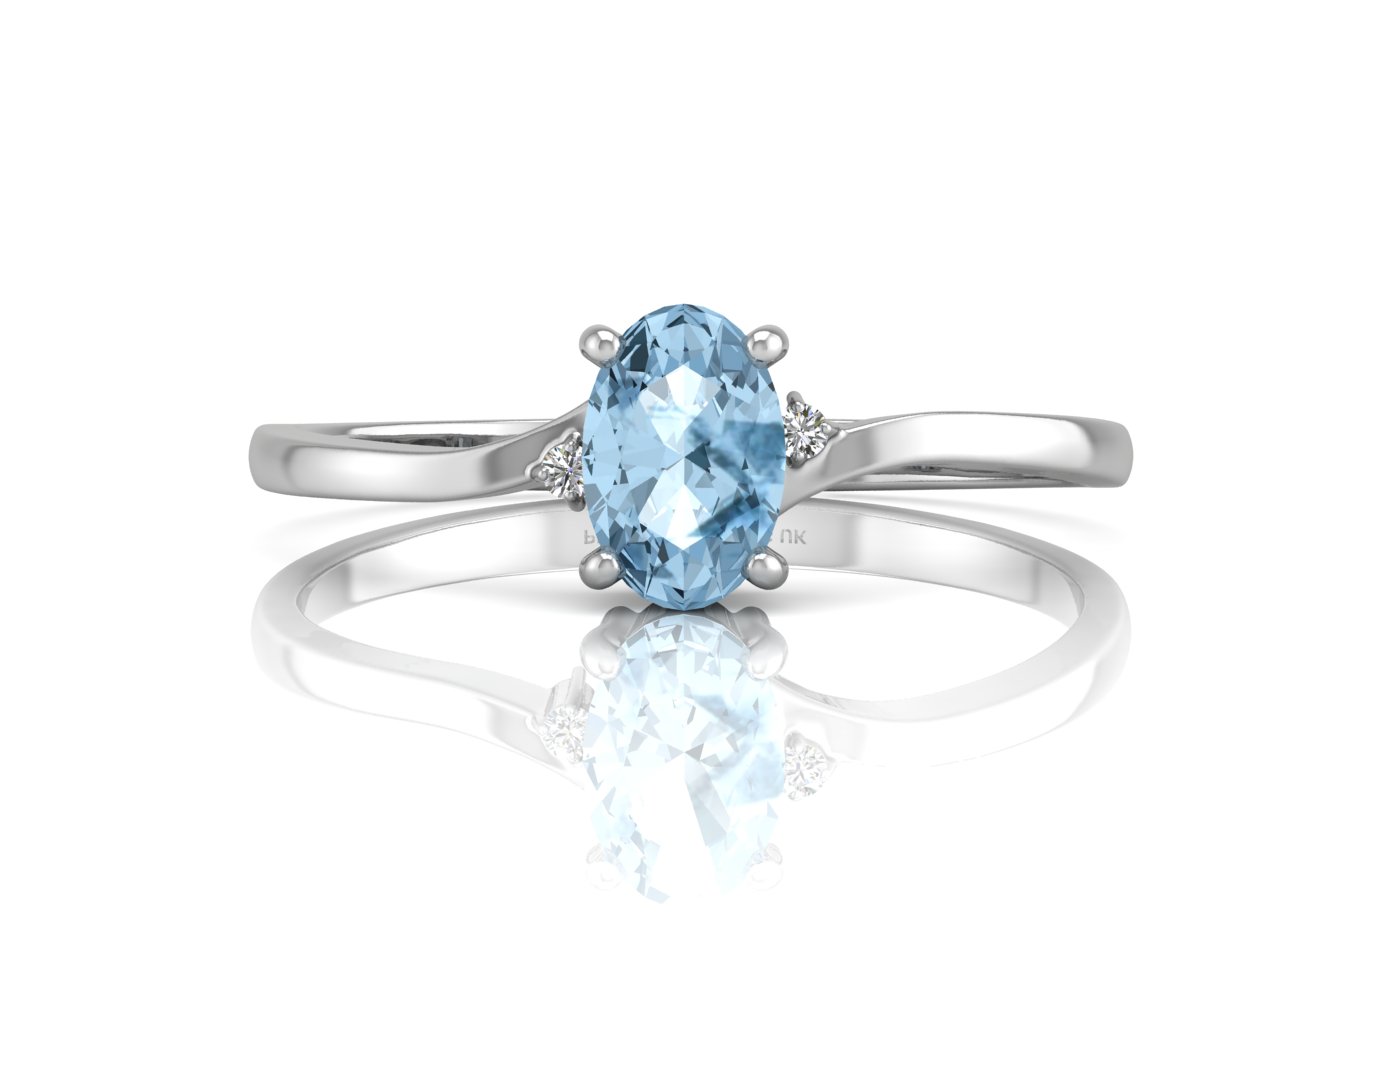 9ct White Gold Diamond and Oval Shape Blue Topaz Ring - Image 4 of 8